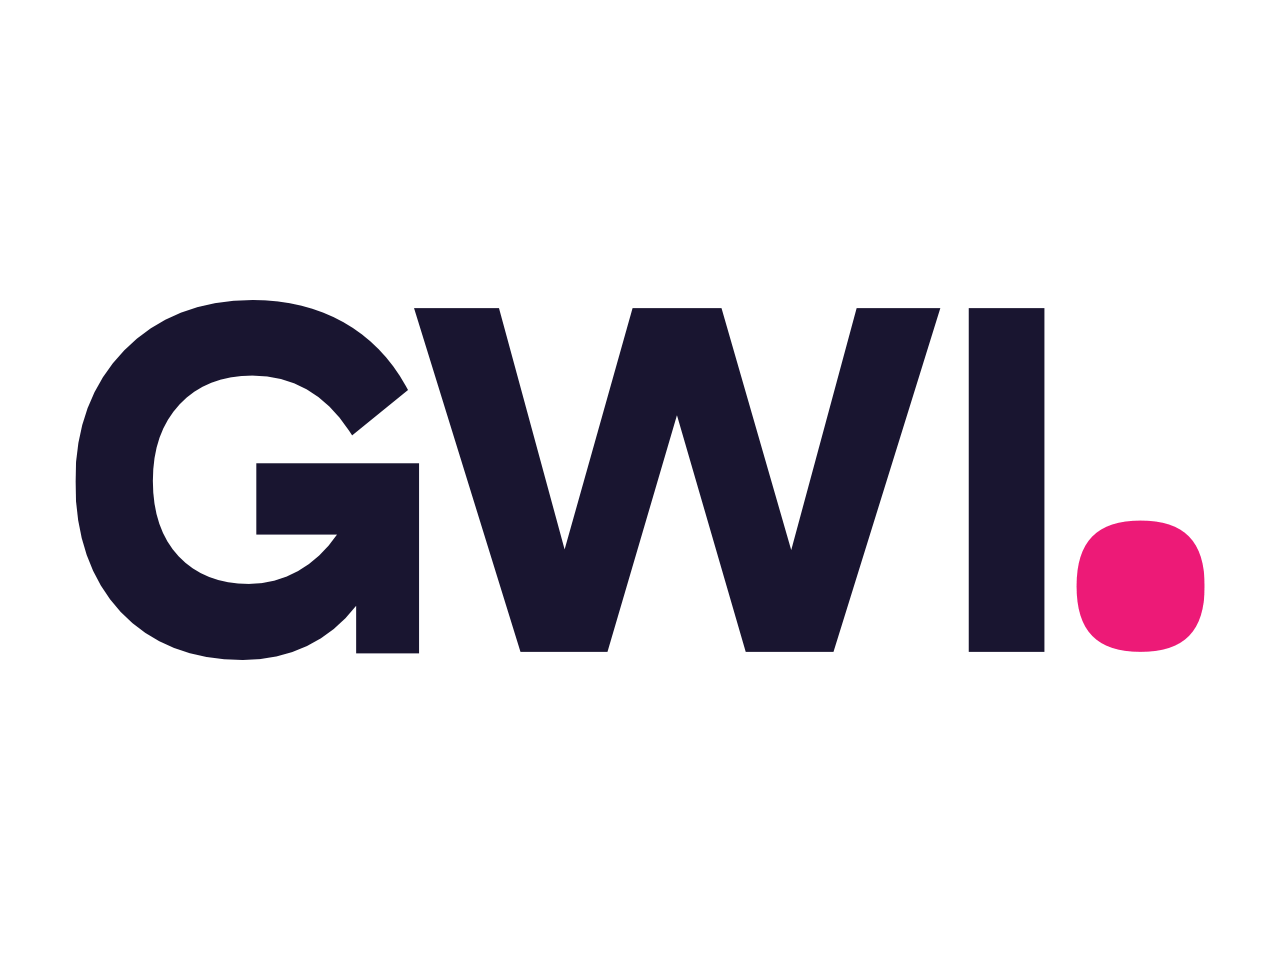 GWI - Audience Insight Tools, Digital Analytics & Consumer Trends